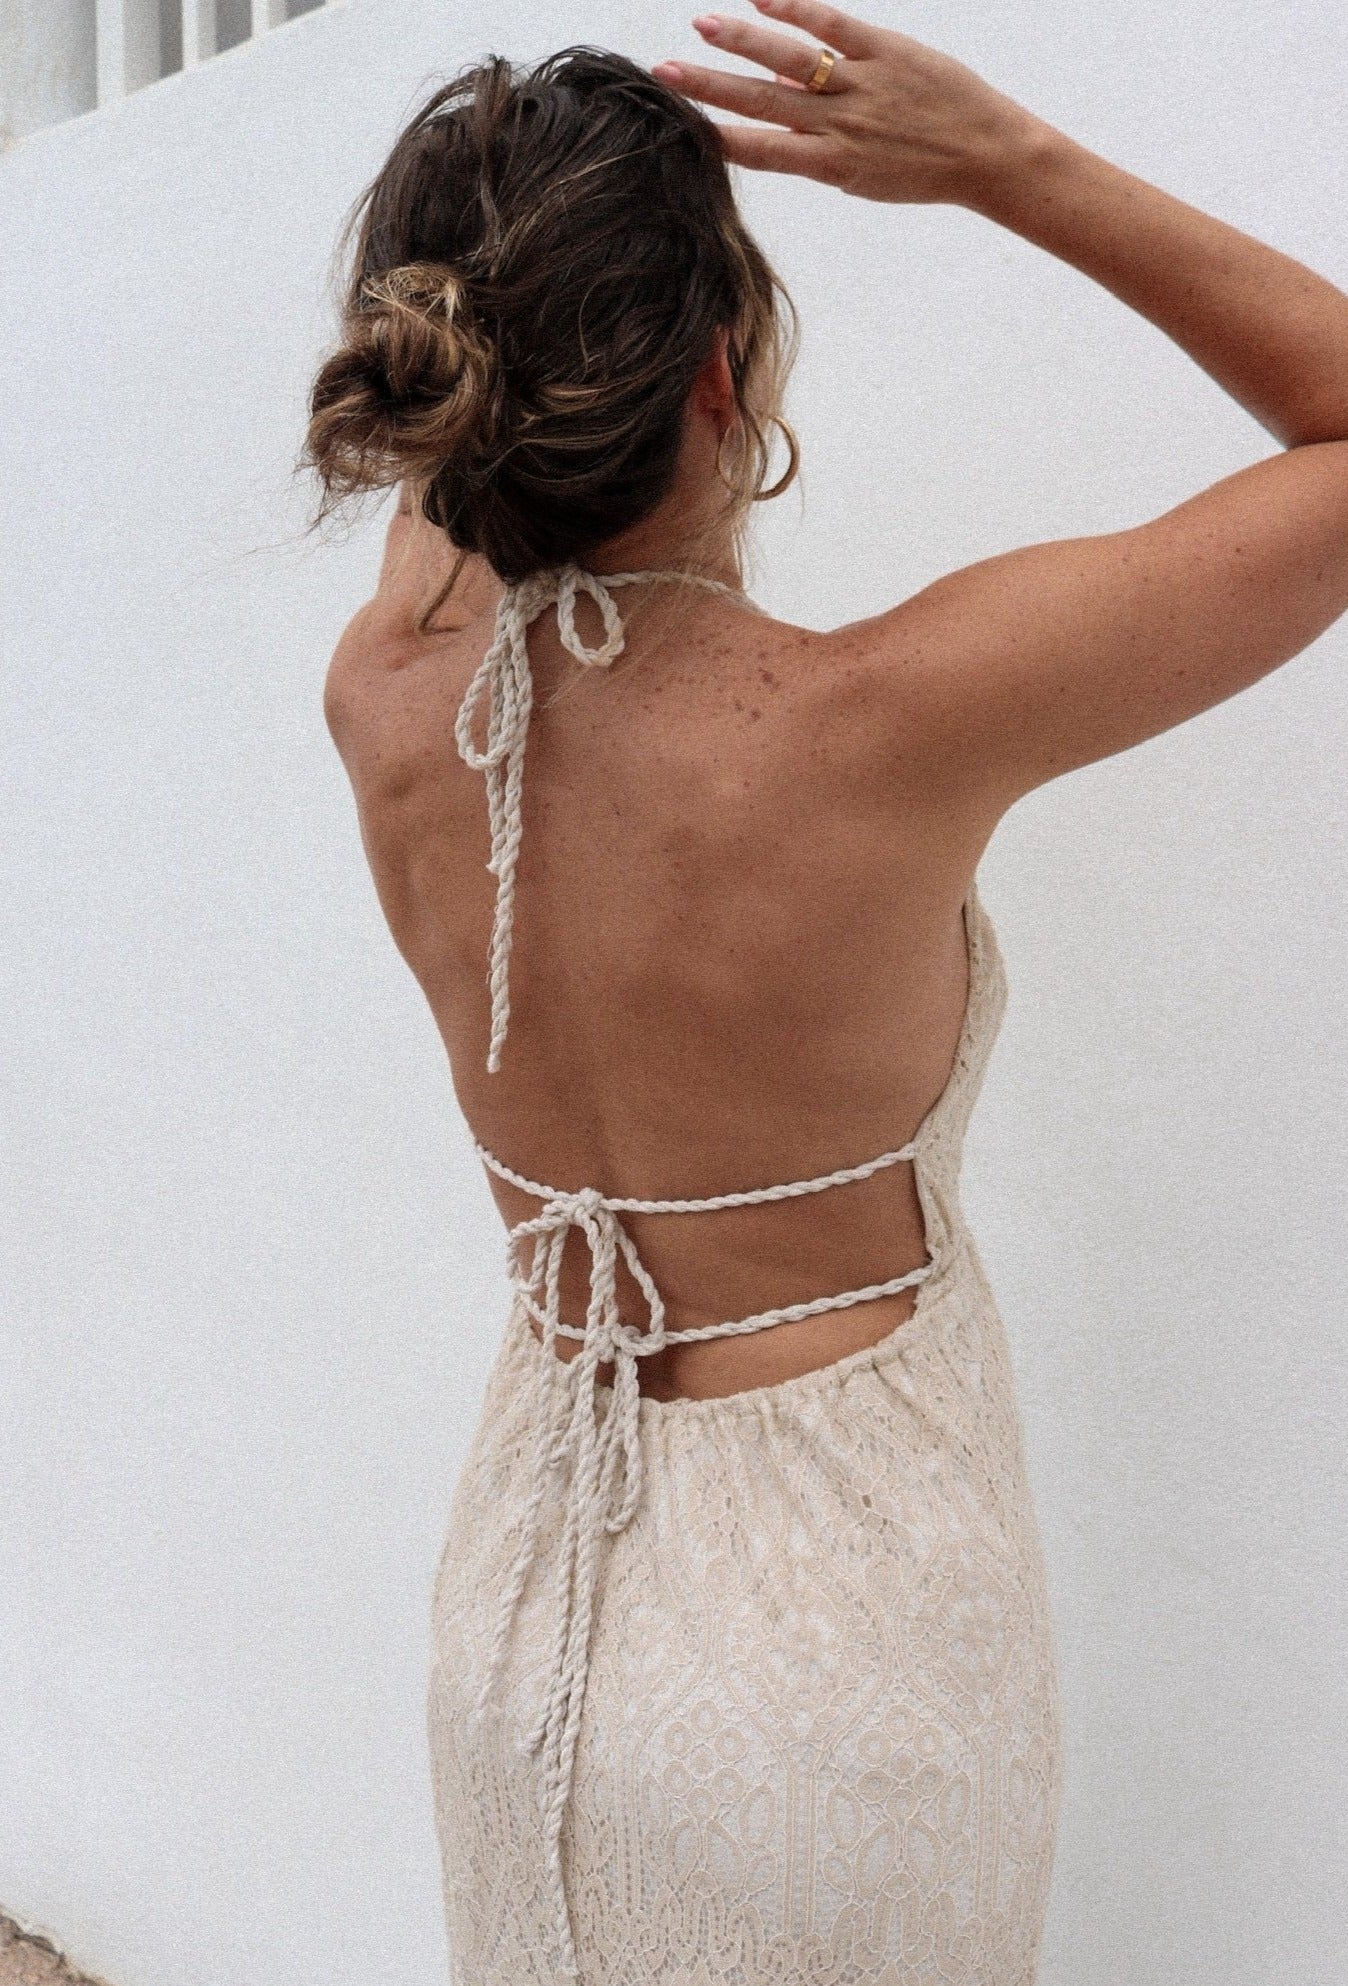 Rope lace backless crochet maxi dress in natural from Scarlette The Label, an online fashion boutique for women.